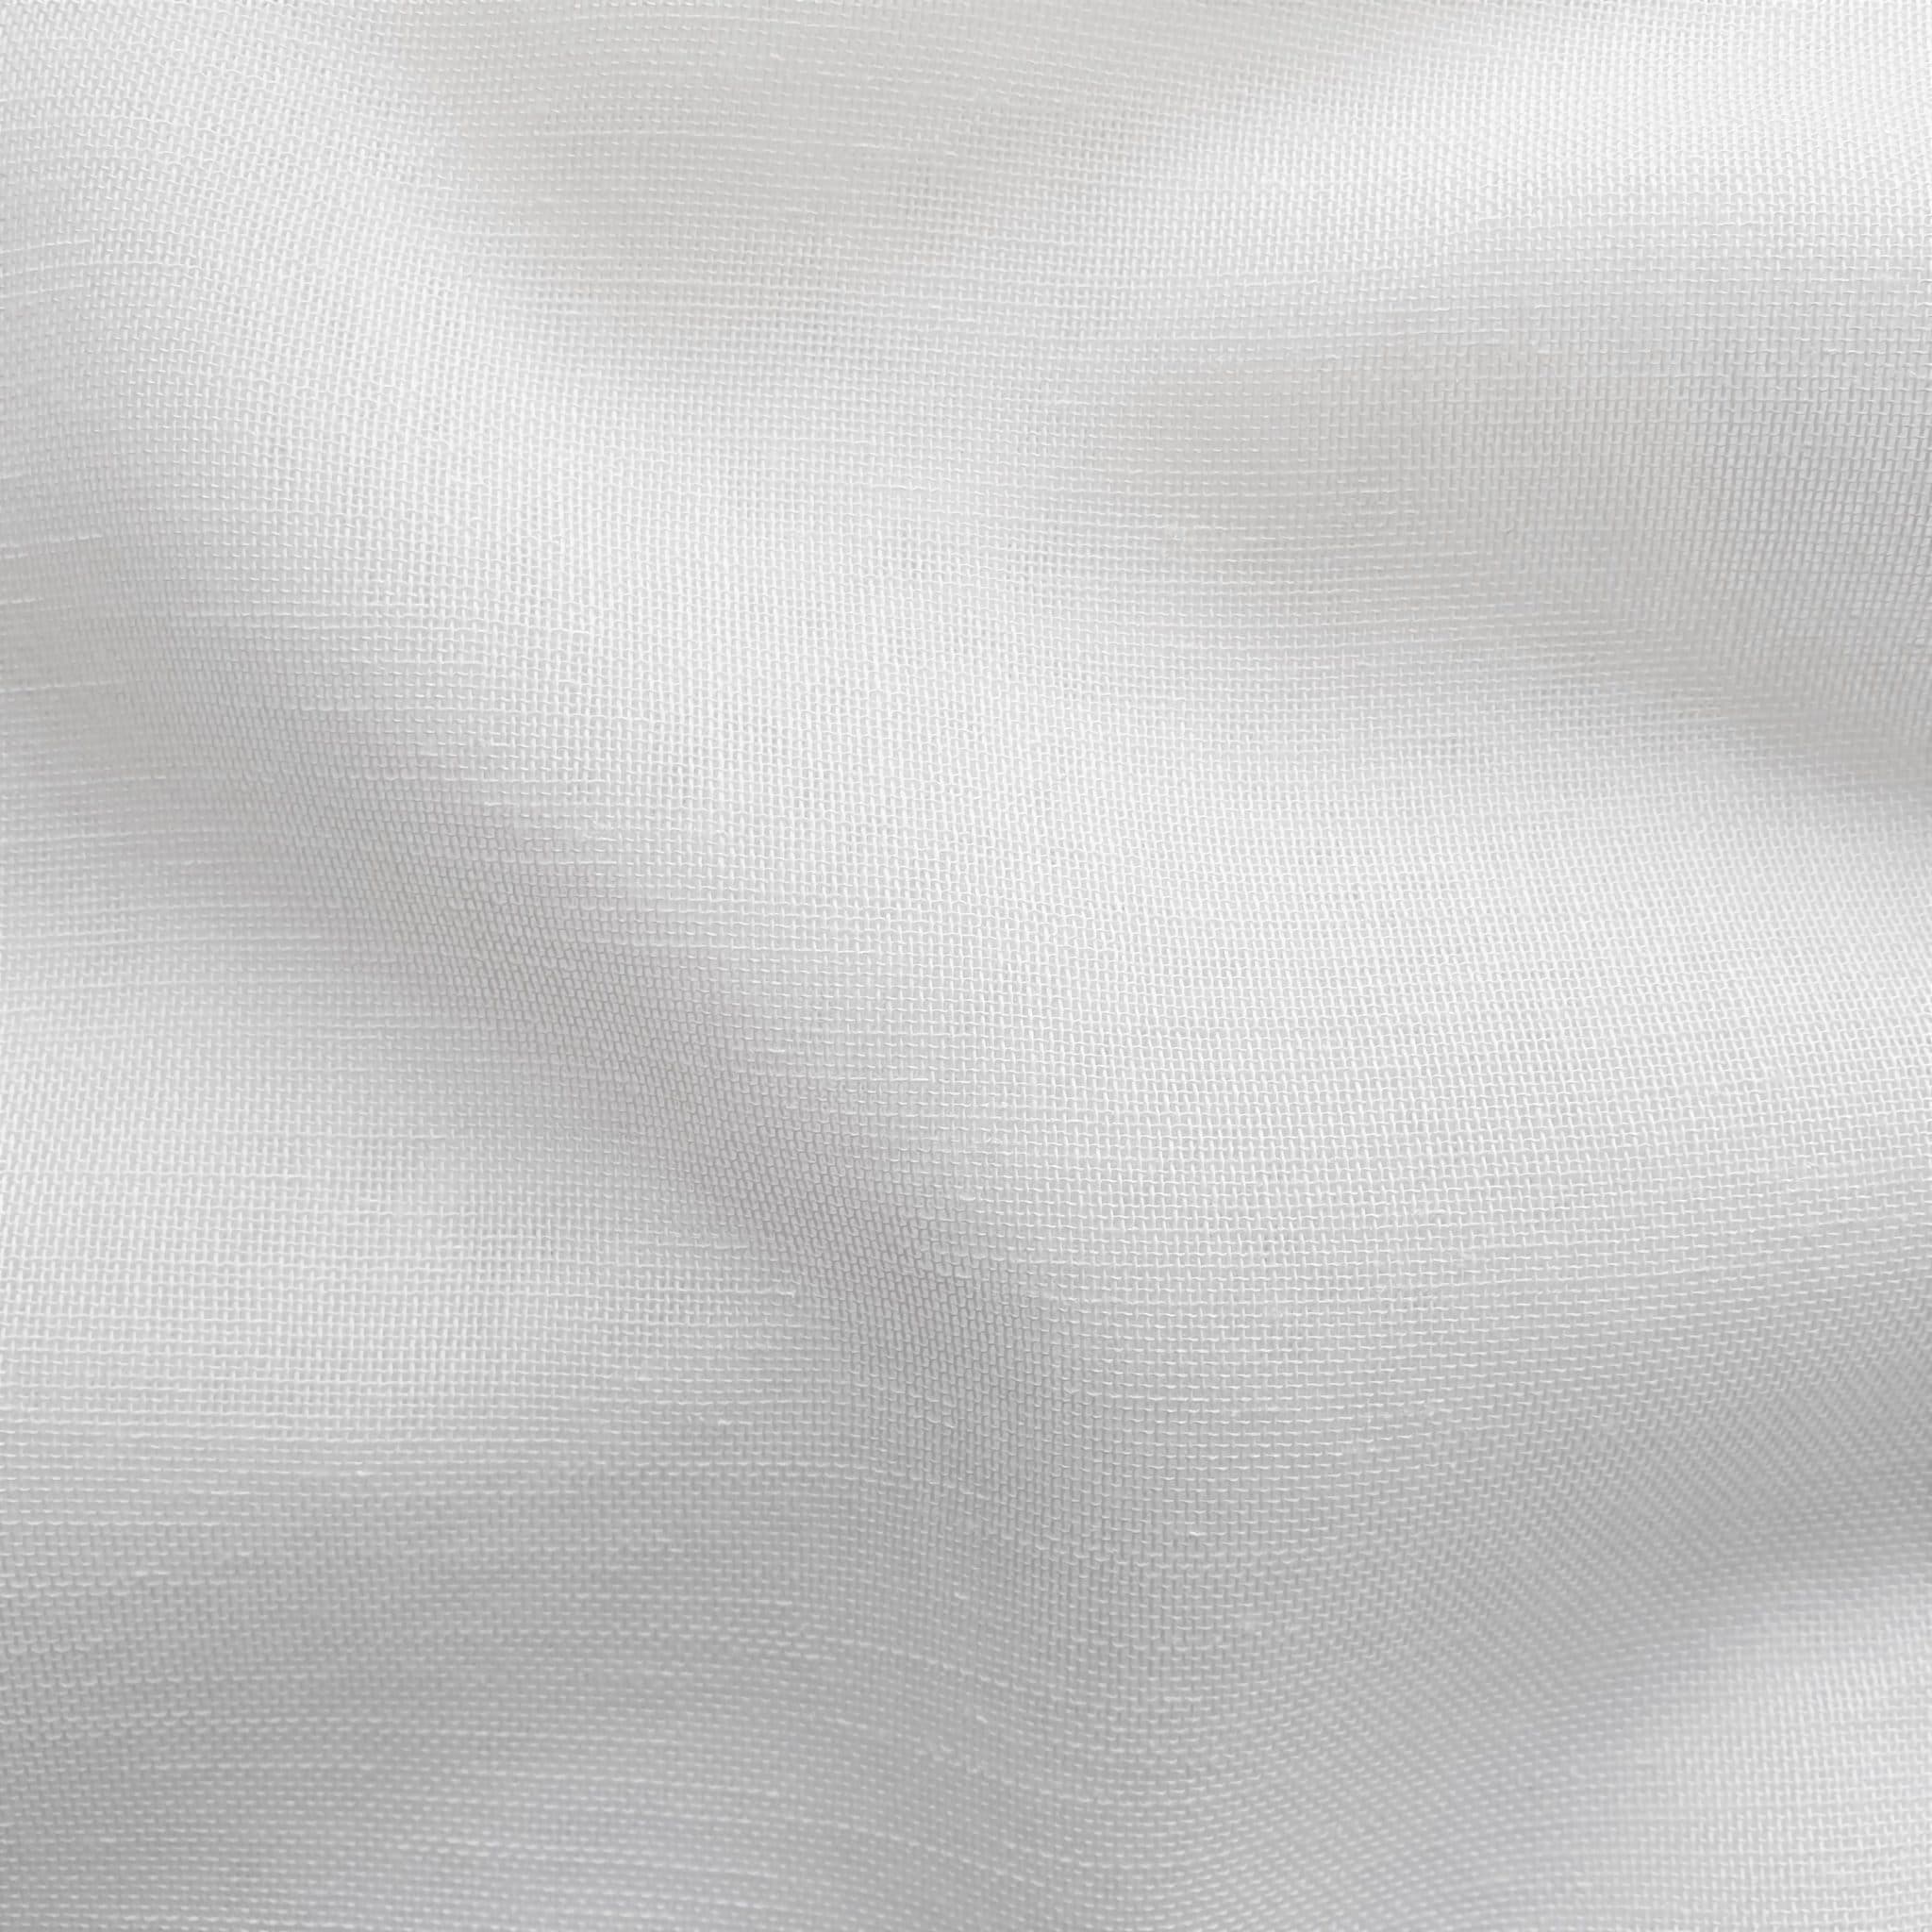 Emin White FR Voile - 3m Wide - White Linen Voile - Contract Fabric